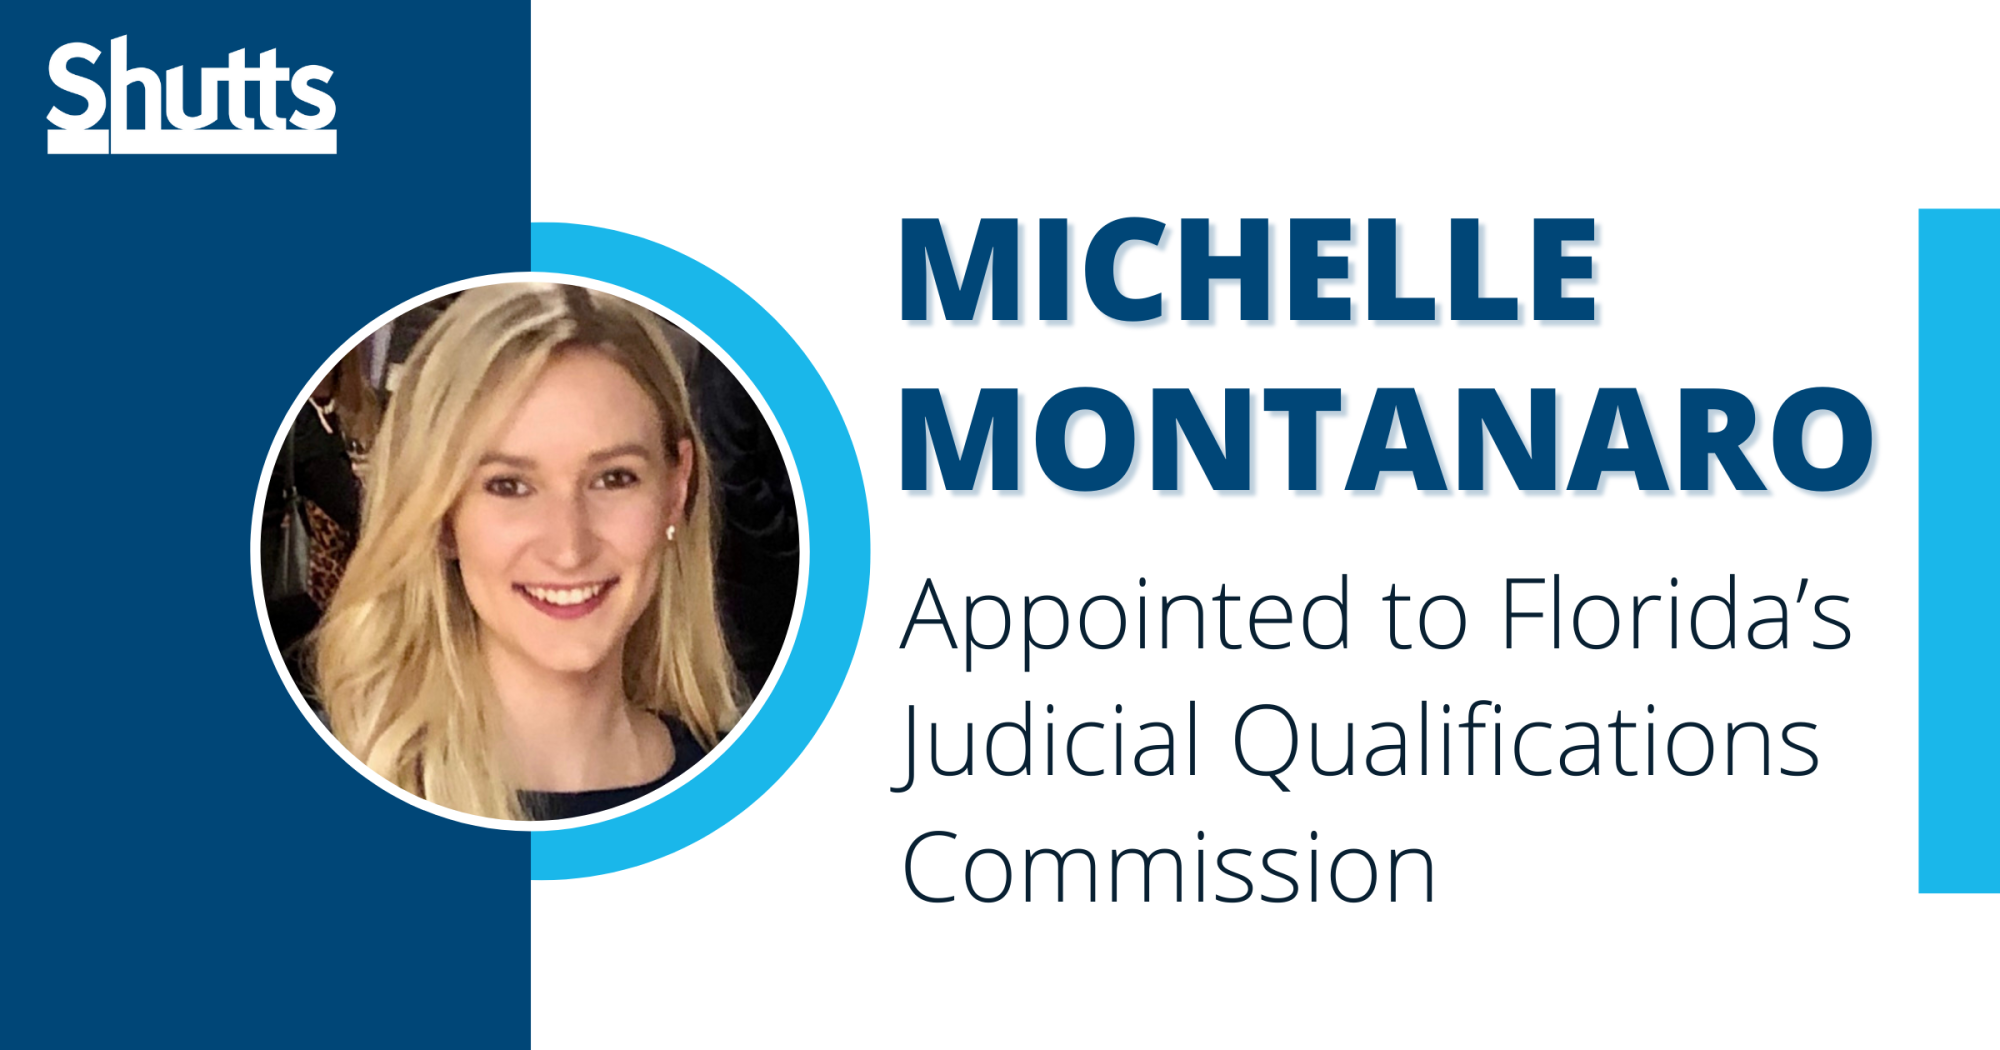 Michelle Montanaro Appointed to Florida Judicial Qualifications Commission